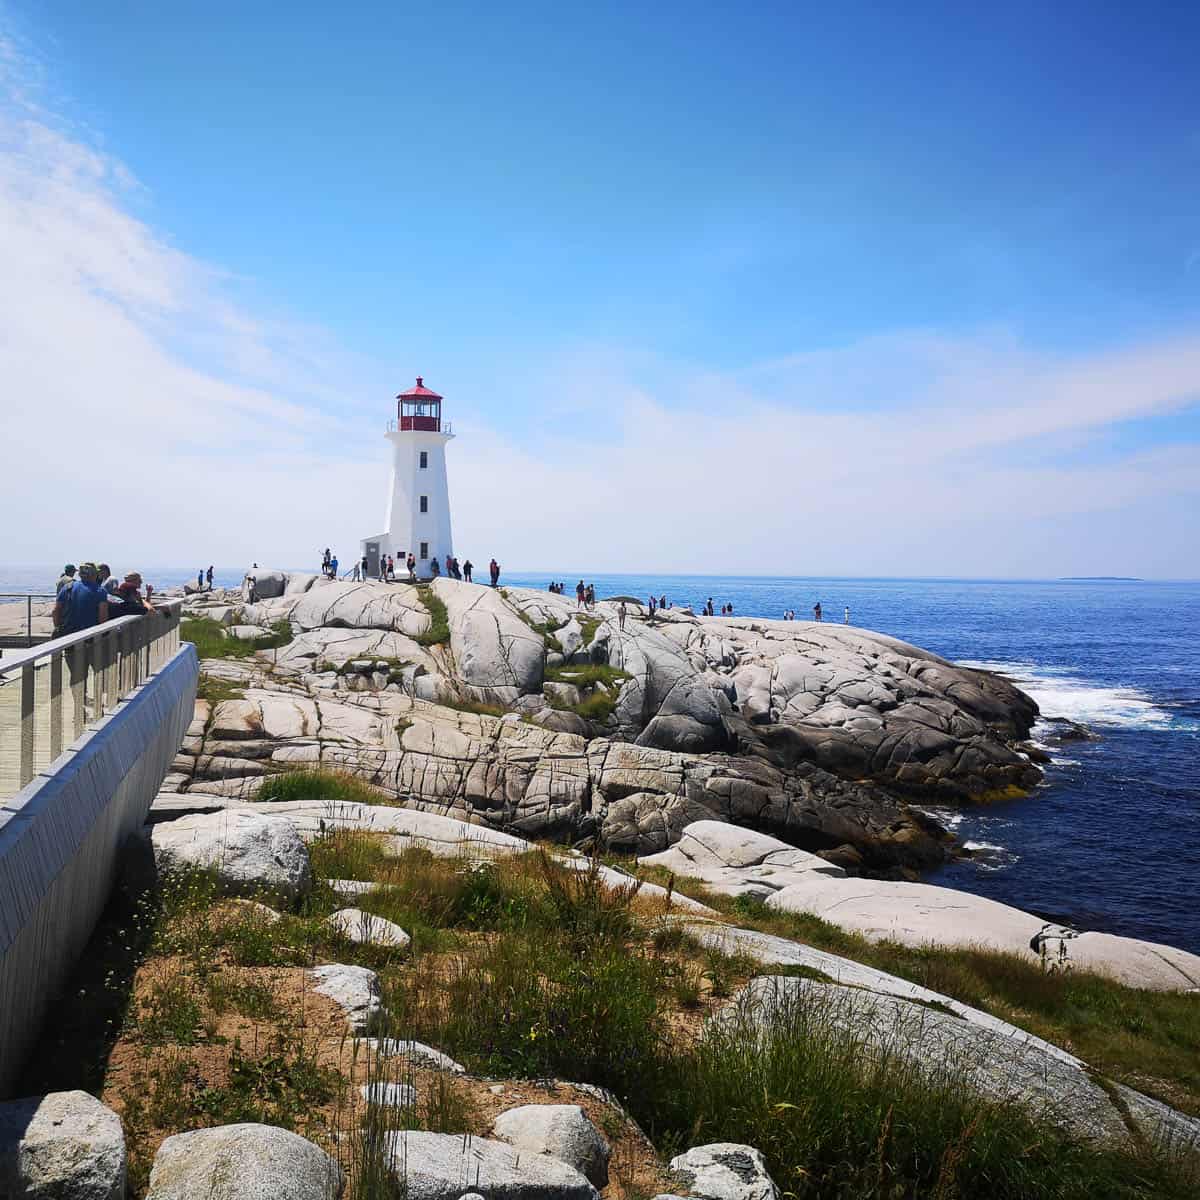 Peggys Cove Nova Scotia - the most famous lighthouse in Canada and a recognizable Canadian landmark.